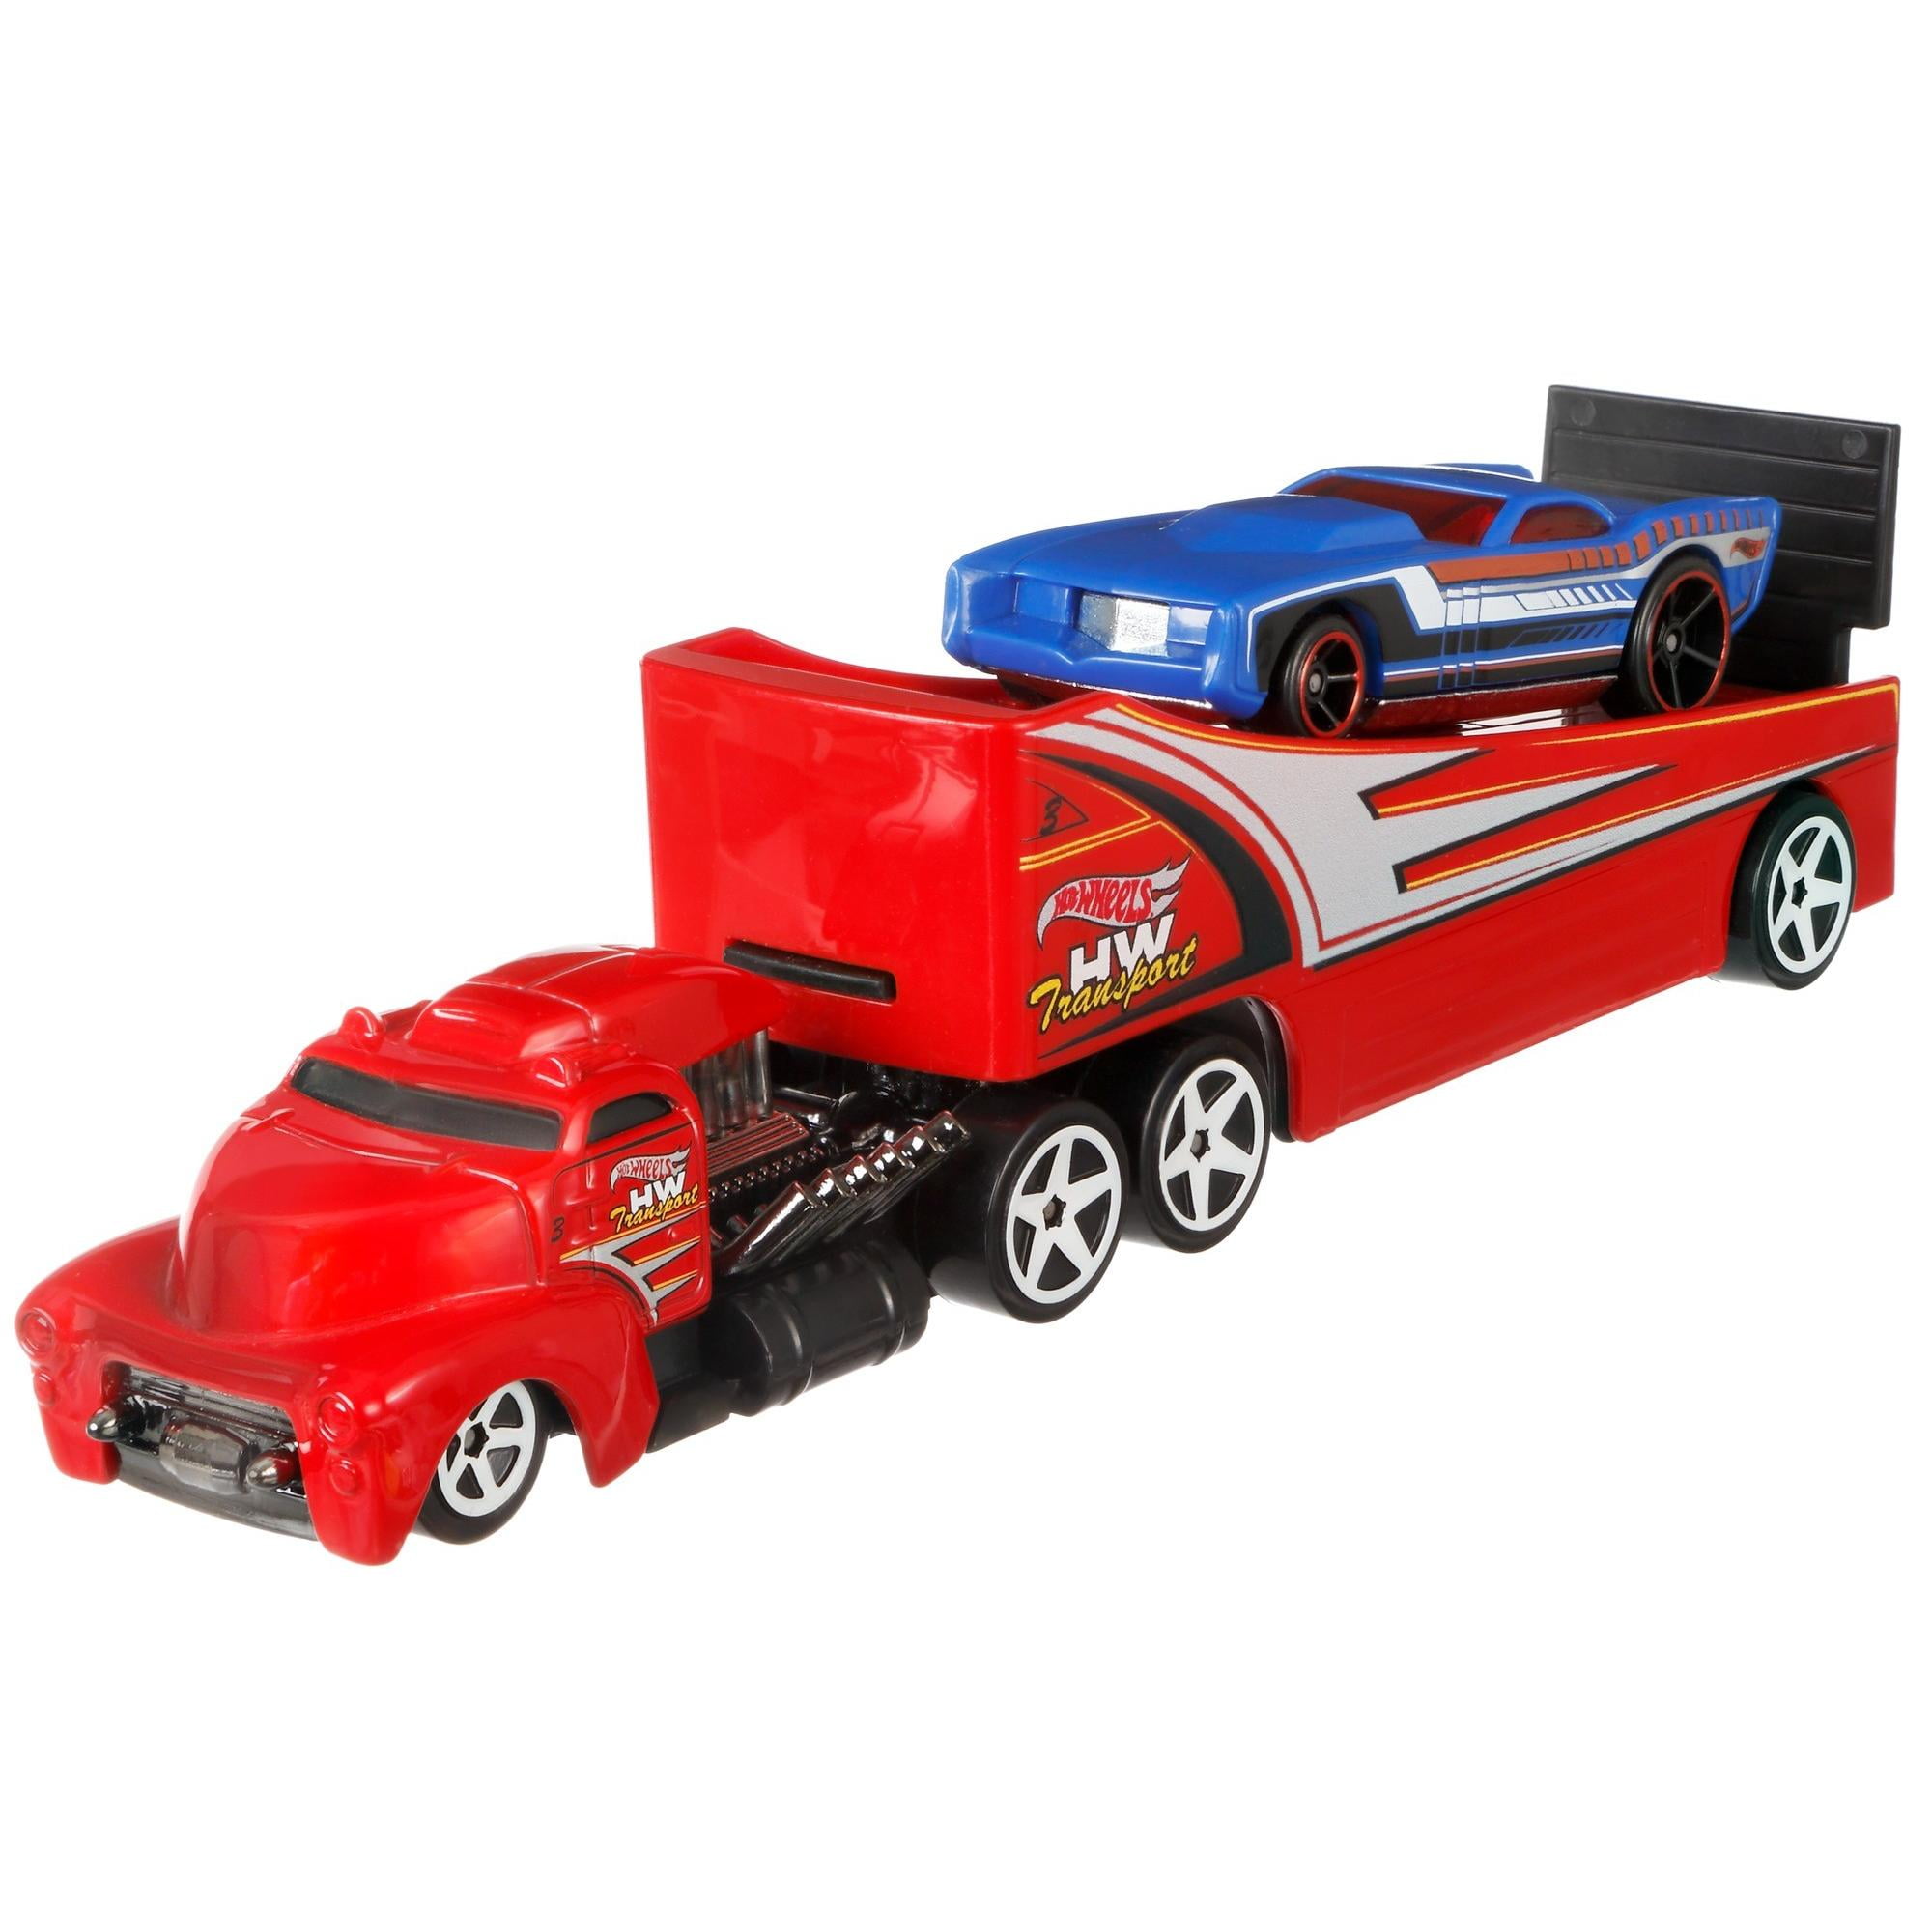 HOT WHEELS SUPER Rigs Transporter & Auto Set MISERY "Cavalli Camion staccabile 